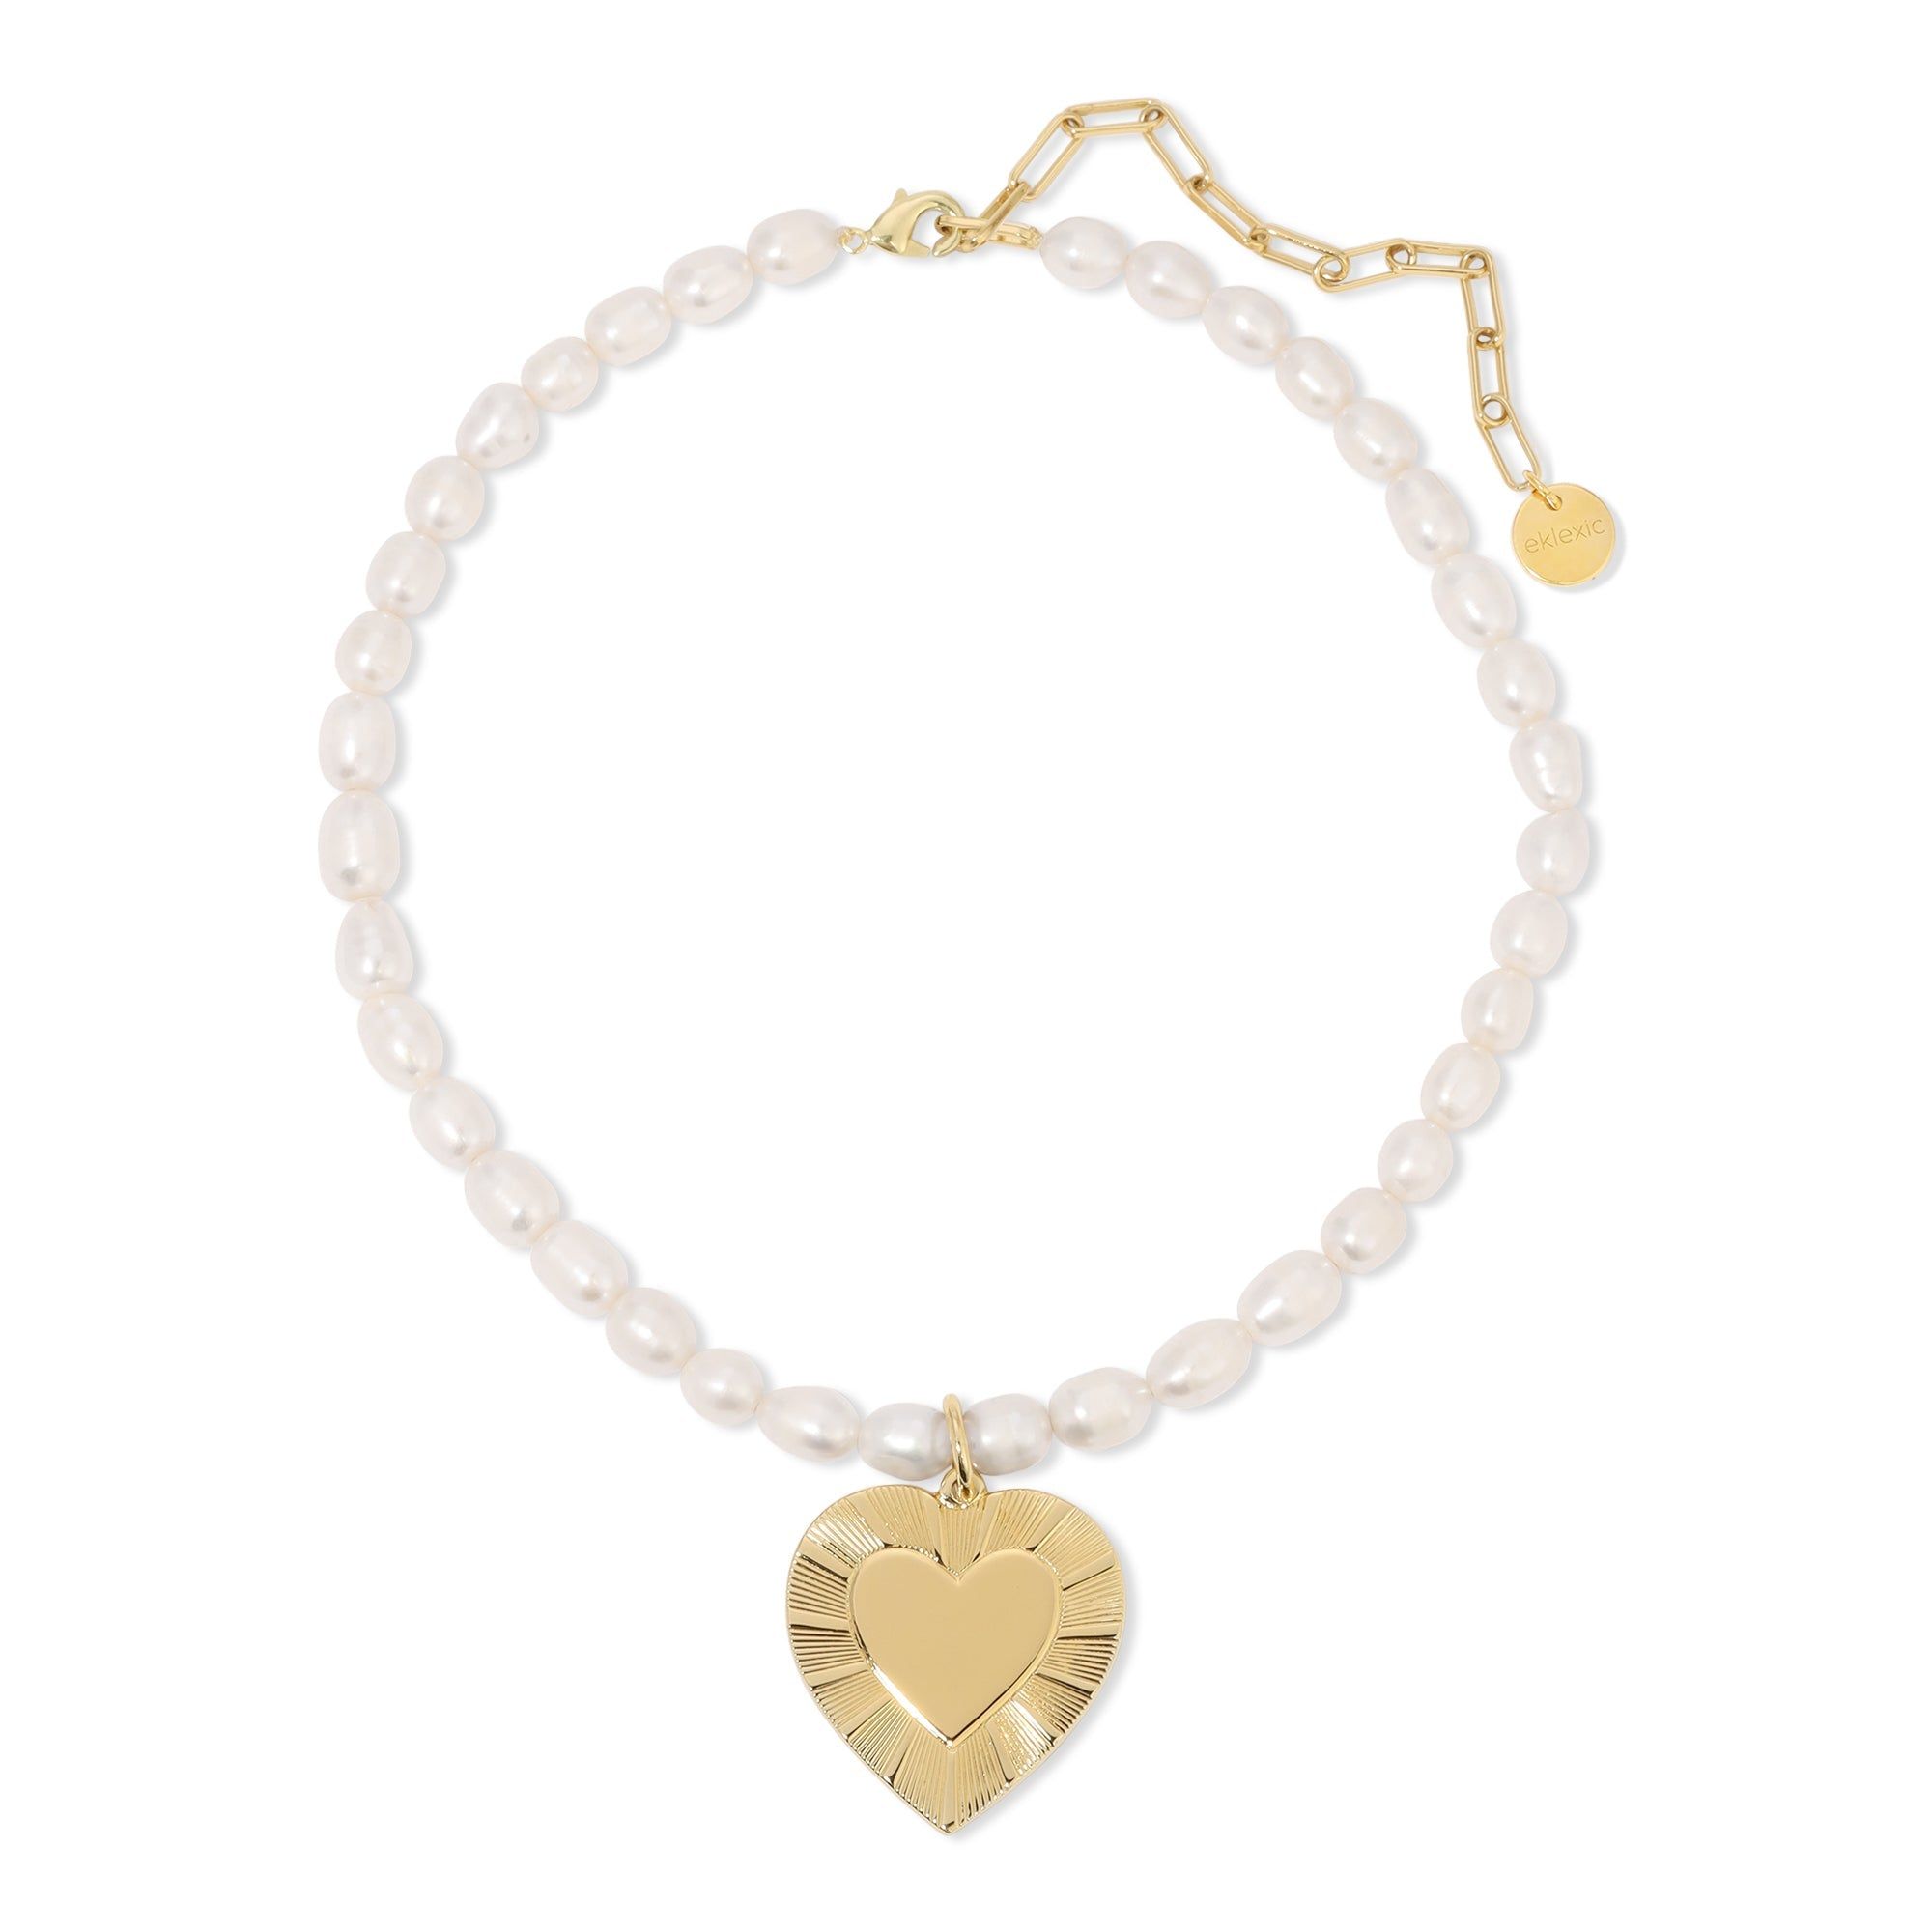 a bracelet with a heart charm and pearls